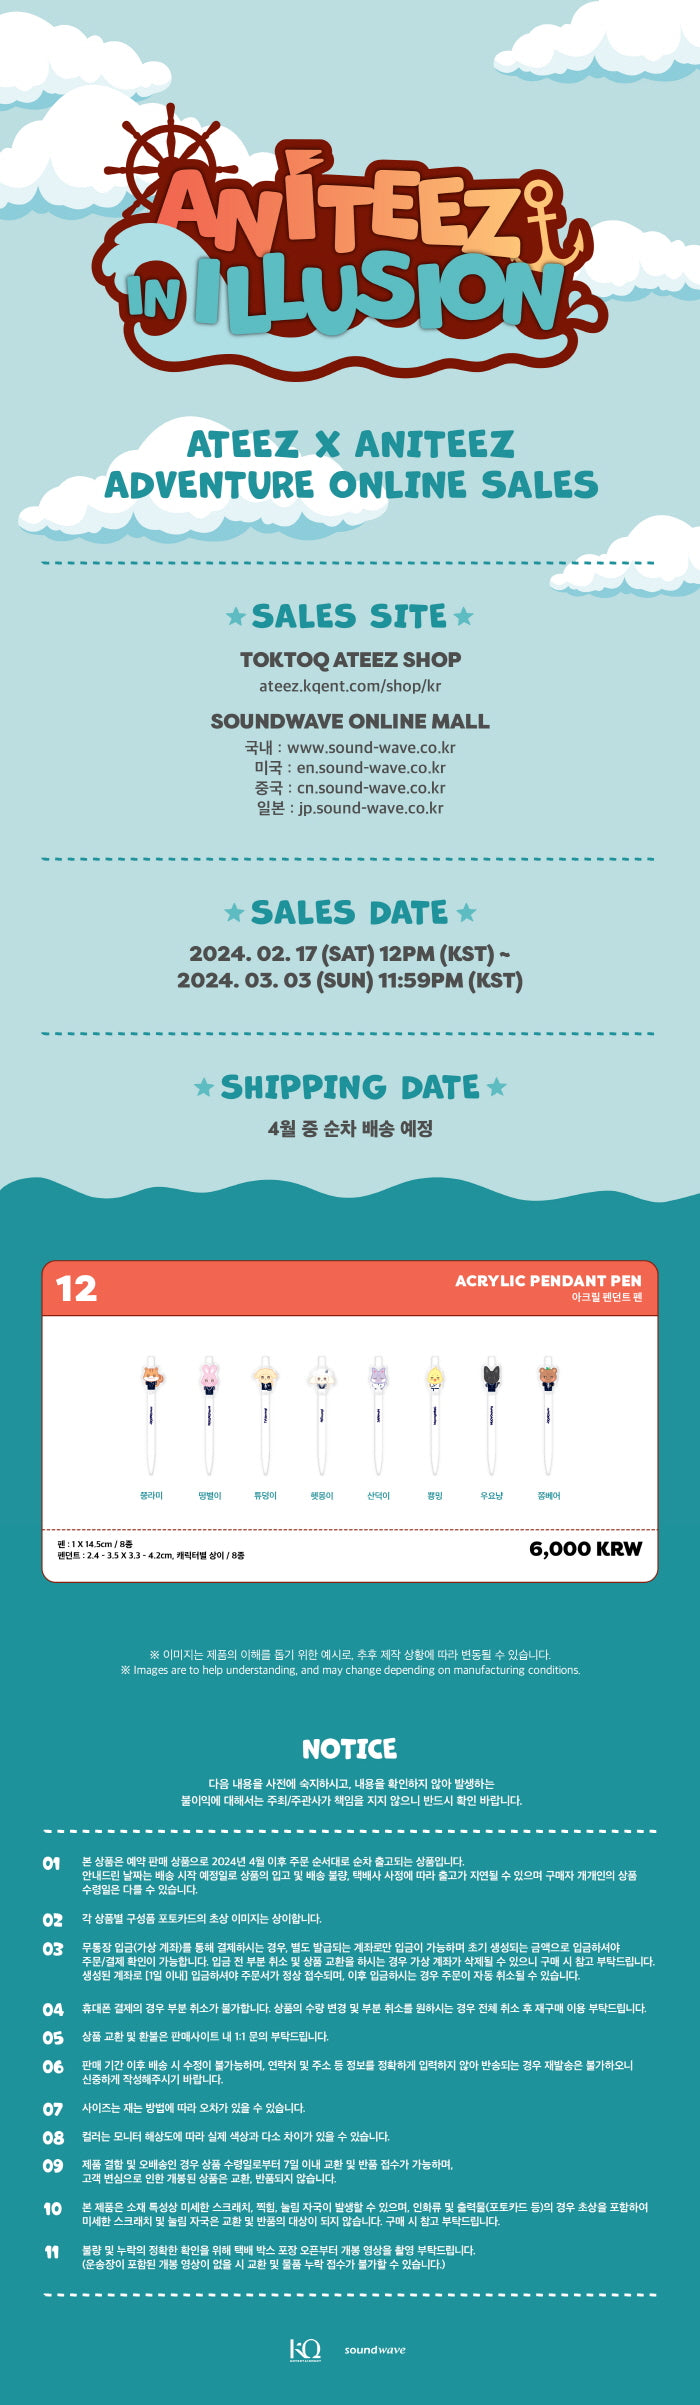 ATEEZ - ANITEEZ IN ILLUSION OFFICIAL MD ACRYLIC PENDANT PEN Infographic